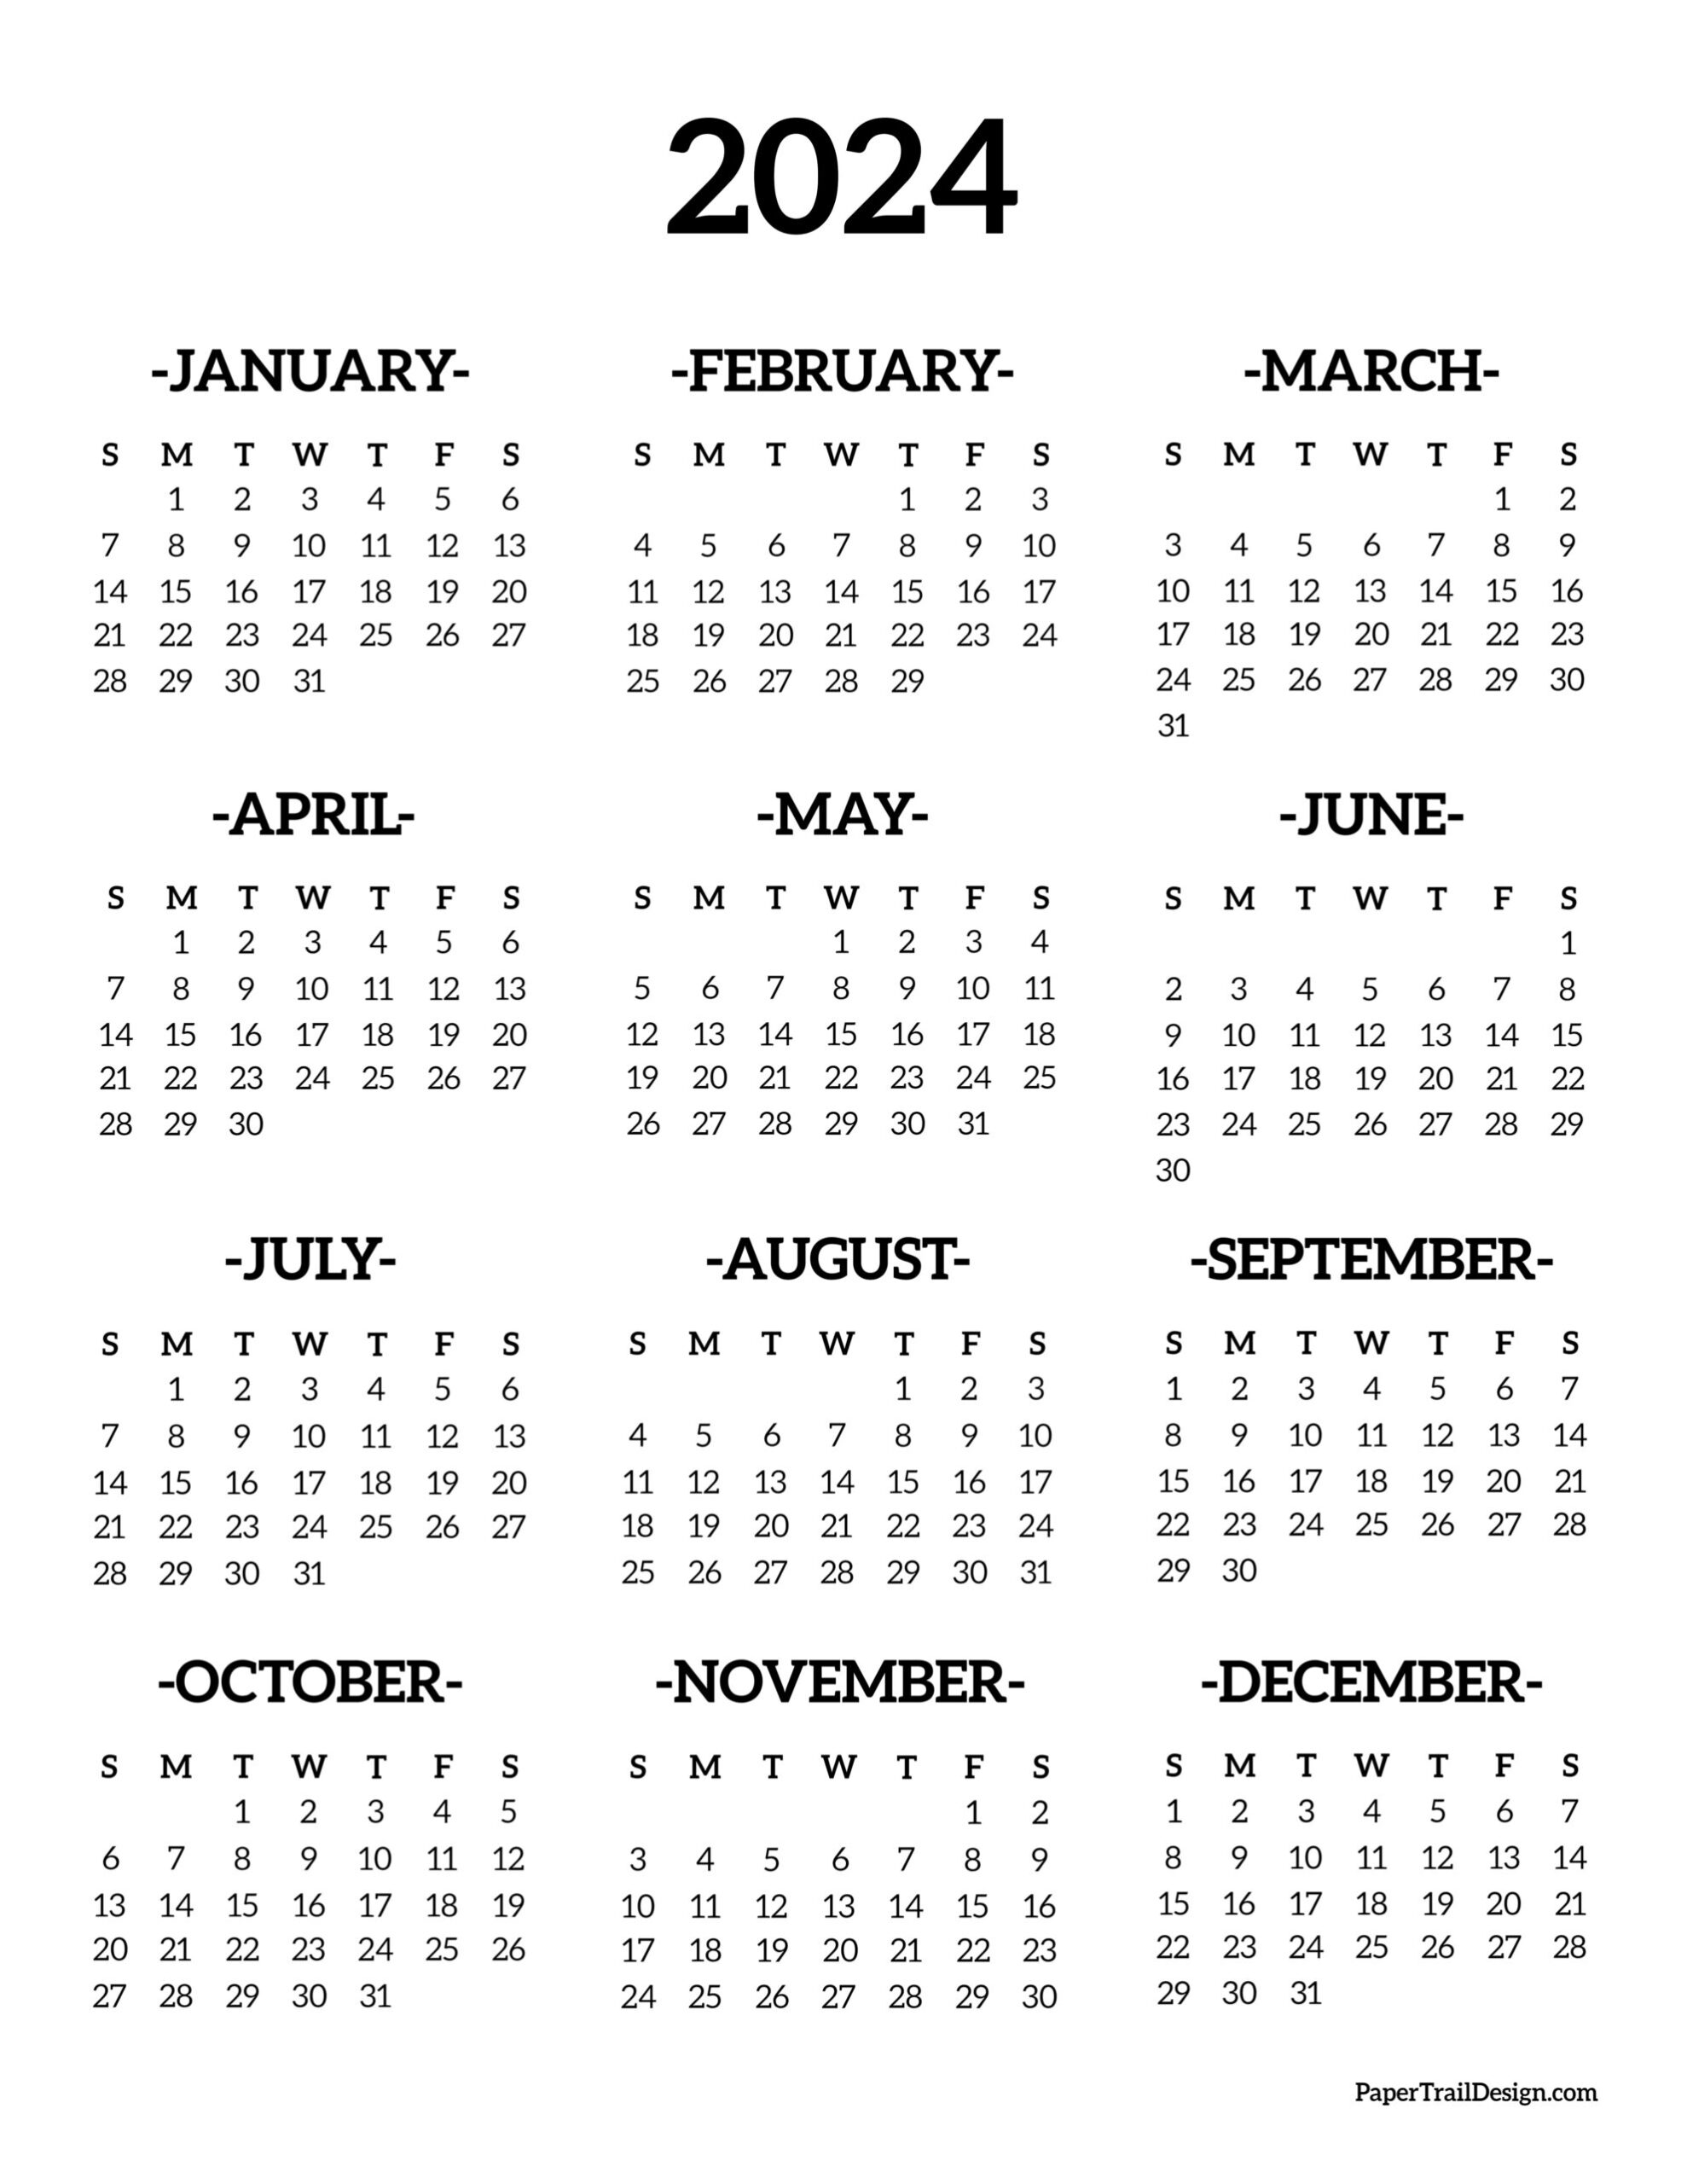 Calendar 2024 Printable One Page - Paper Trail Design for 2024 Year Calendar Printable Free